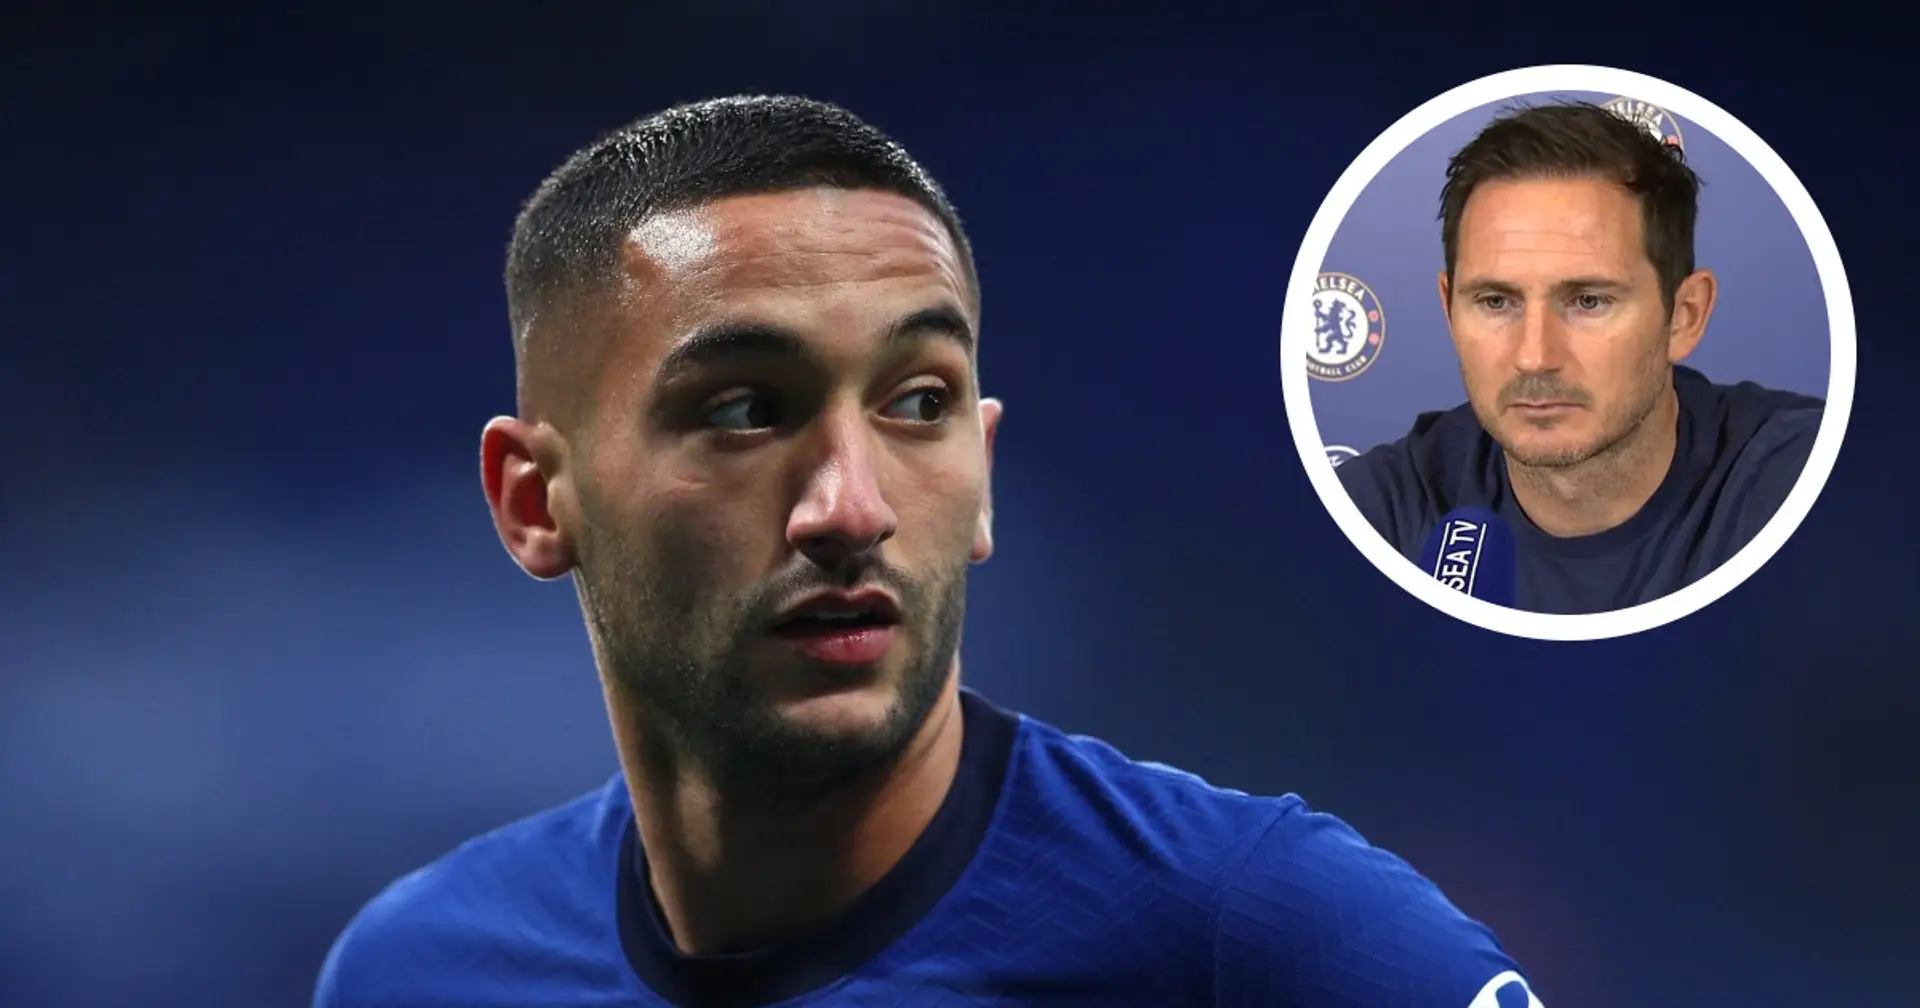 'With Hakim, we had the potential to bring in someone really different': Lampard on Ziyech's potential to replace Pedro, Willian and Hazard